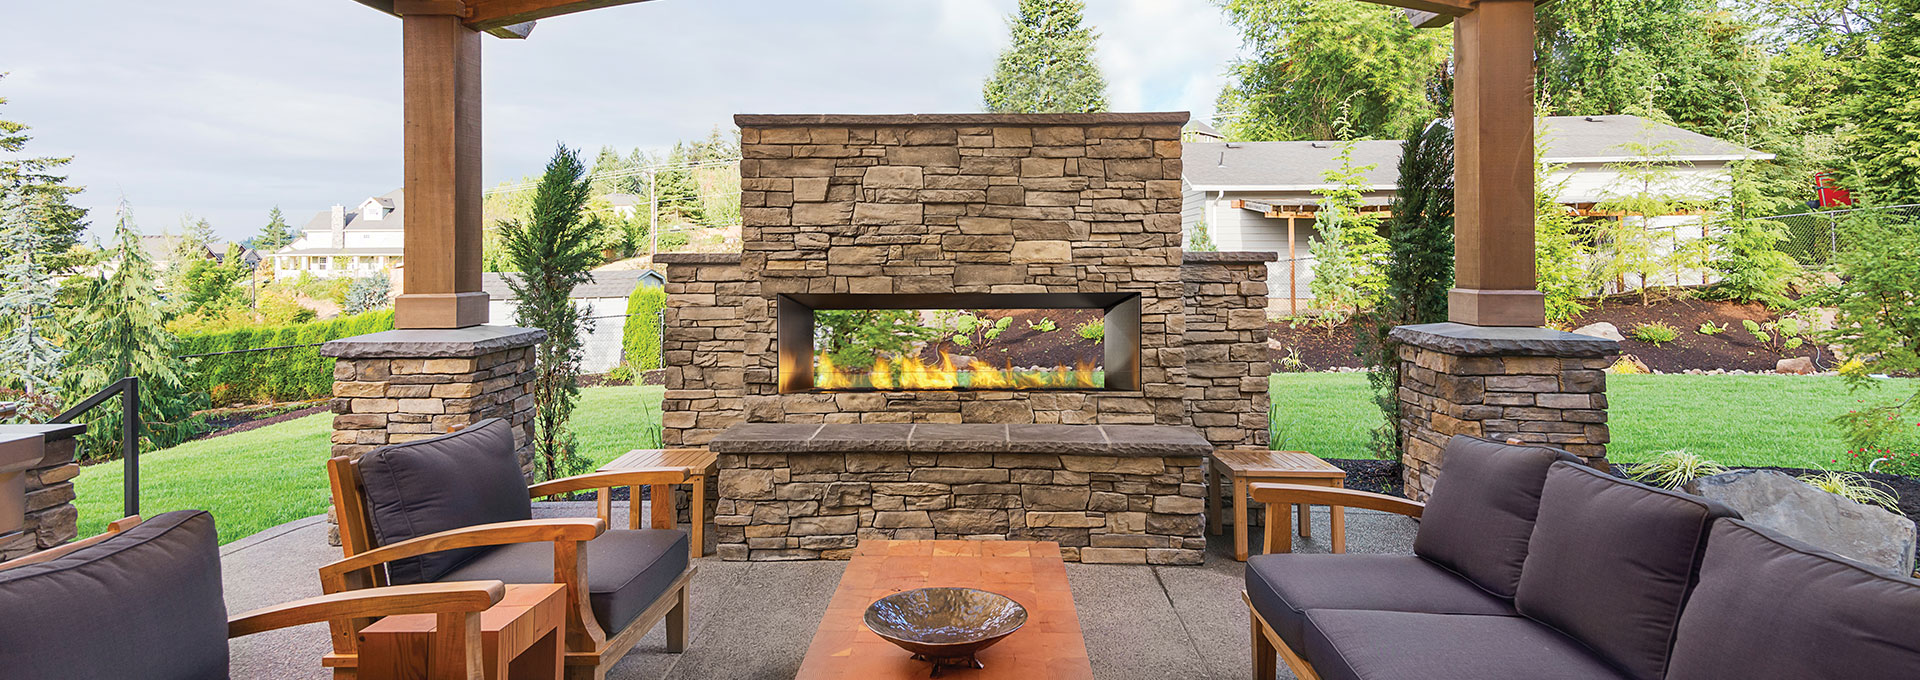 Outdoor Gas Fireplaces Fireplace Kits, Outdoor Gas Fireplace Canada